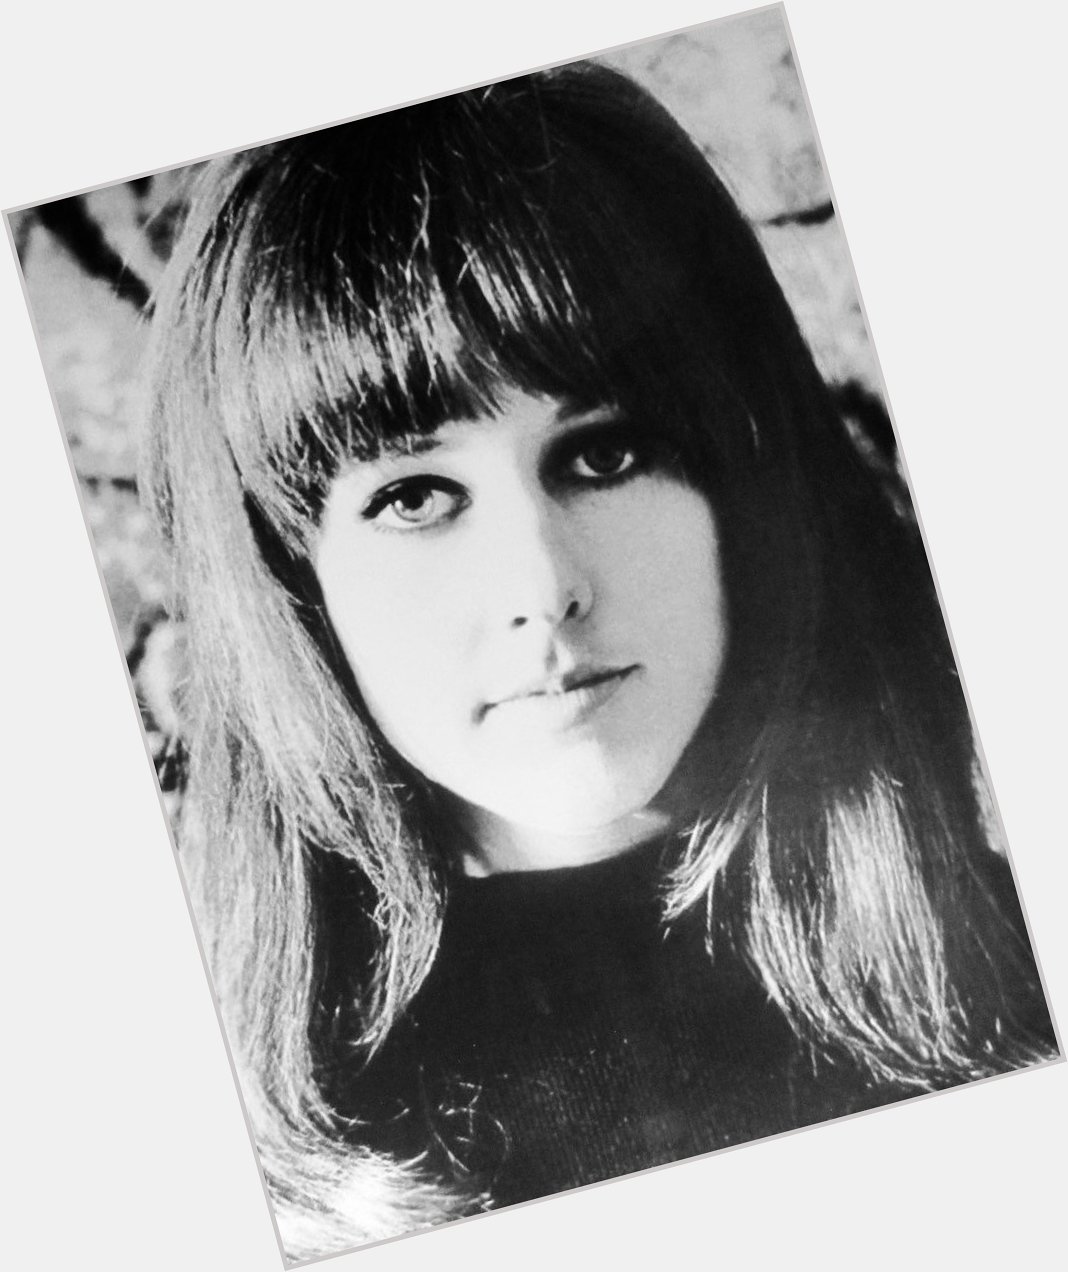 Time is flying by way too fast.
How is this even possible?
Happy 80th birthday, Grace Slick.
80! 